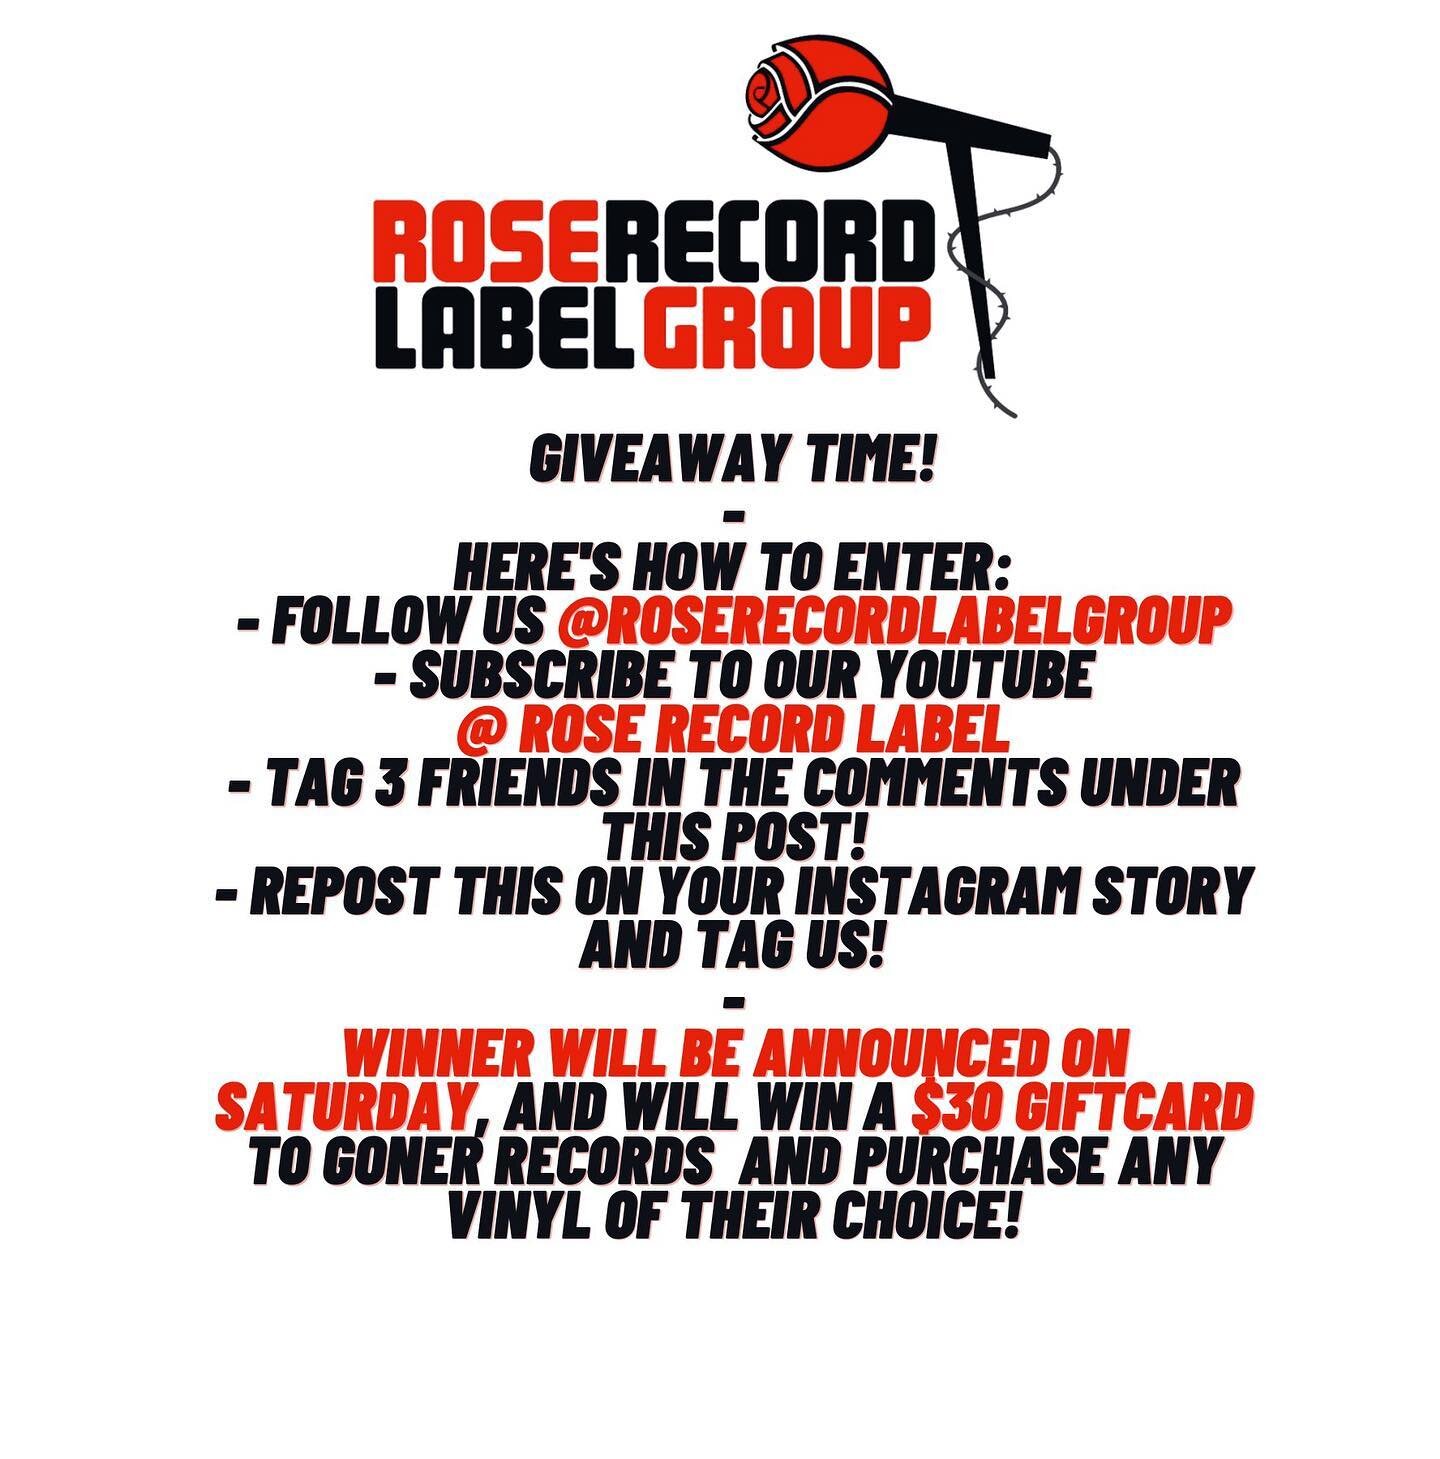 GIVEAWAY TIME🌹
-
FOLLOW THESE STEPS TO ENTER TO SECURE YOUR SPOT TO BE ENTERED IN THE DRAWING!
-
WINNER WILL BE ANNOUNCED ON SATURDAY, AND WILL WIN A $30 GIFTCARD TO @gonerrecords PURCHASE ANY VINYL OF THEIR CHOICE!